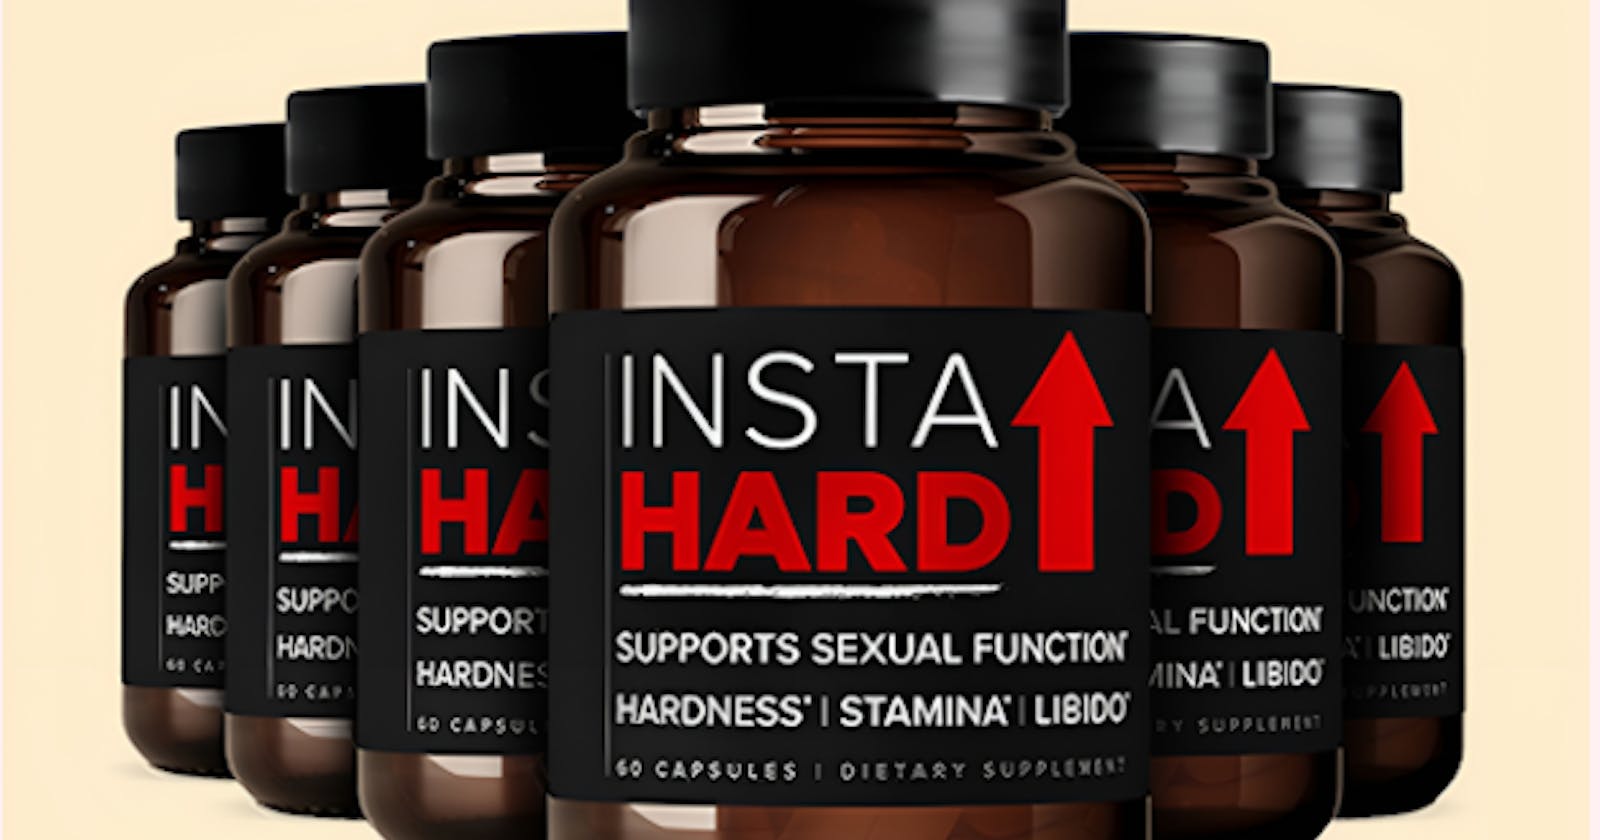 Instahard Reviews - Does This Enhancement Truly Boost Testosterone